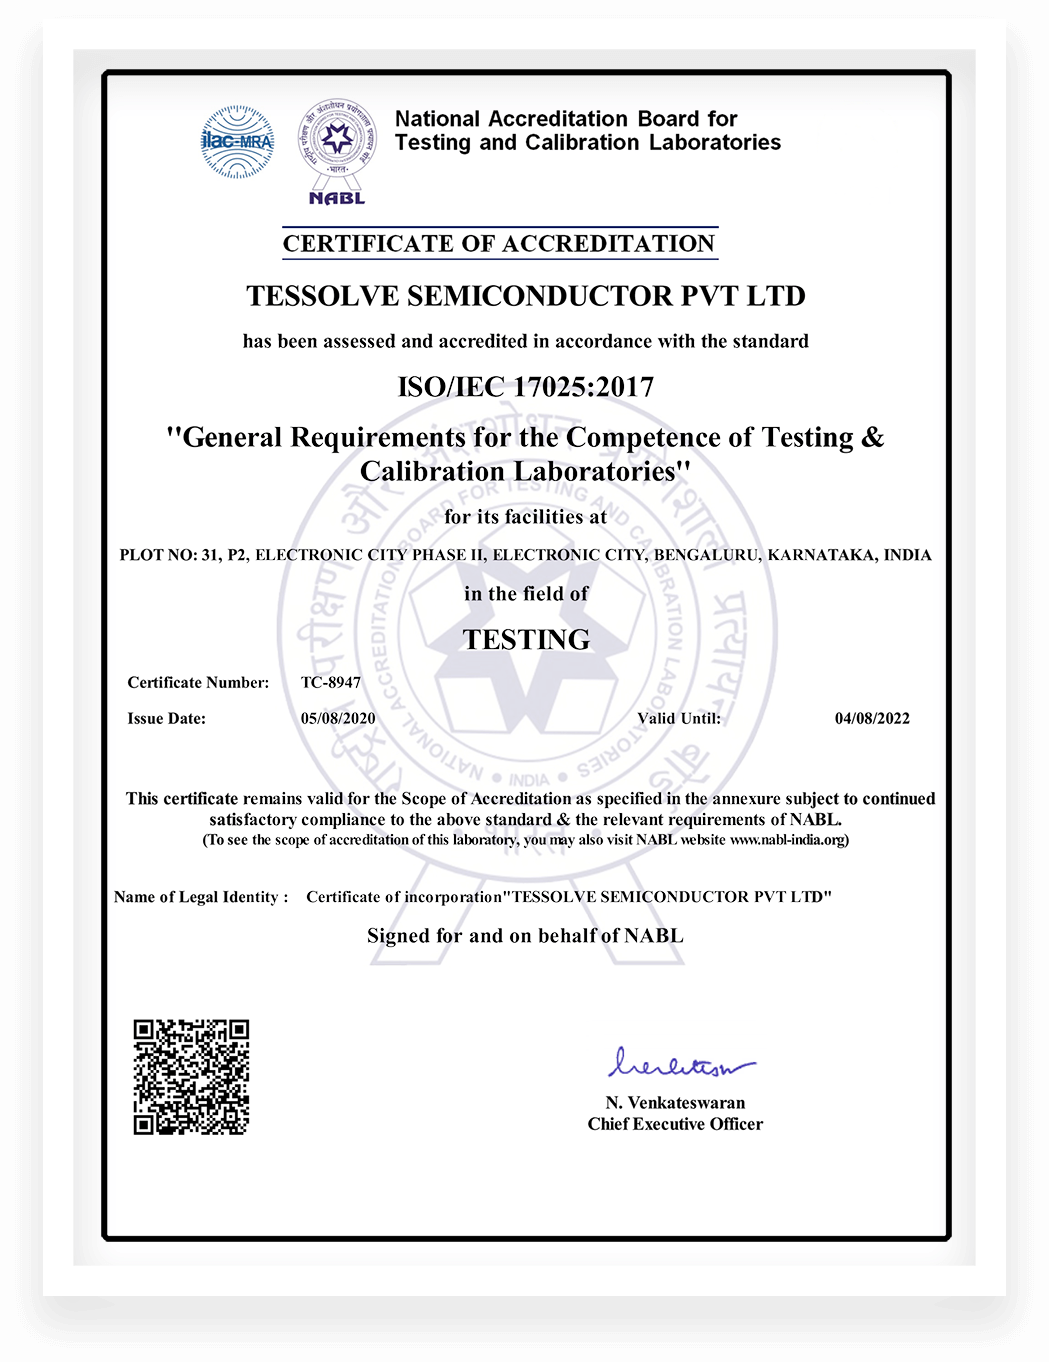 Tessolve gets accredited by National Accreditation Board for Testing and Calibration Laboratories for competence in Testing